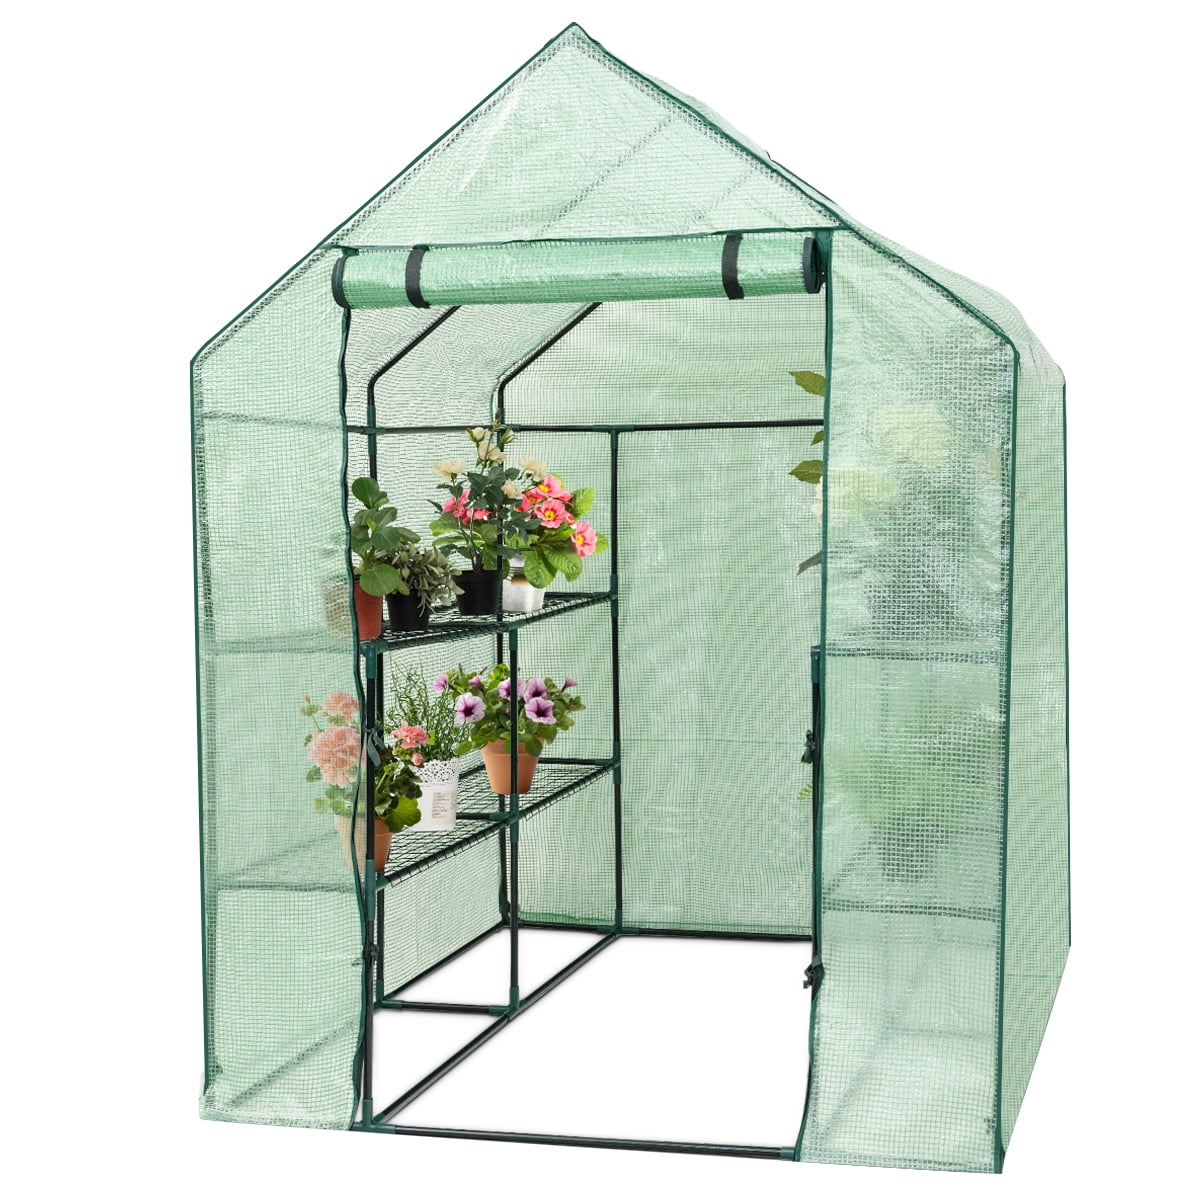 SHANGXING Walk in Greenhouse Replacement Cover with Roll-Up Zipper Door-28x56x76 Inch PE Plant Gardening Greenhouse Cover for Gardening Plants Cold Frost Protection Wind Rain Proof No Frames Include